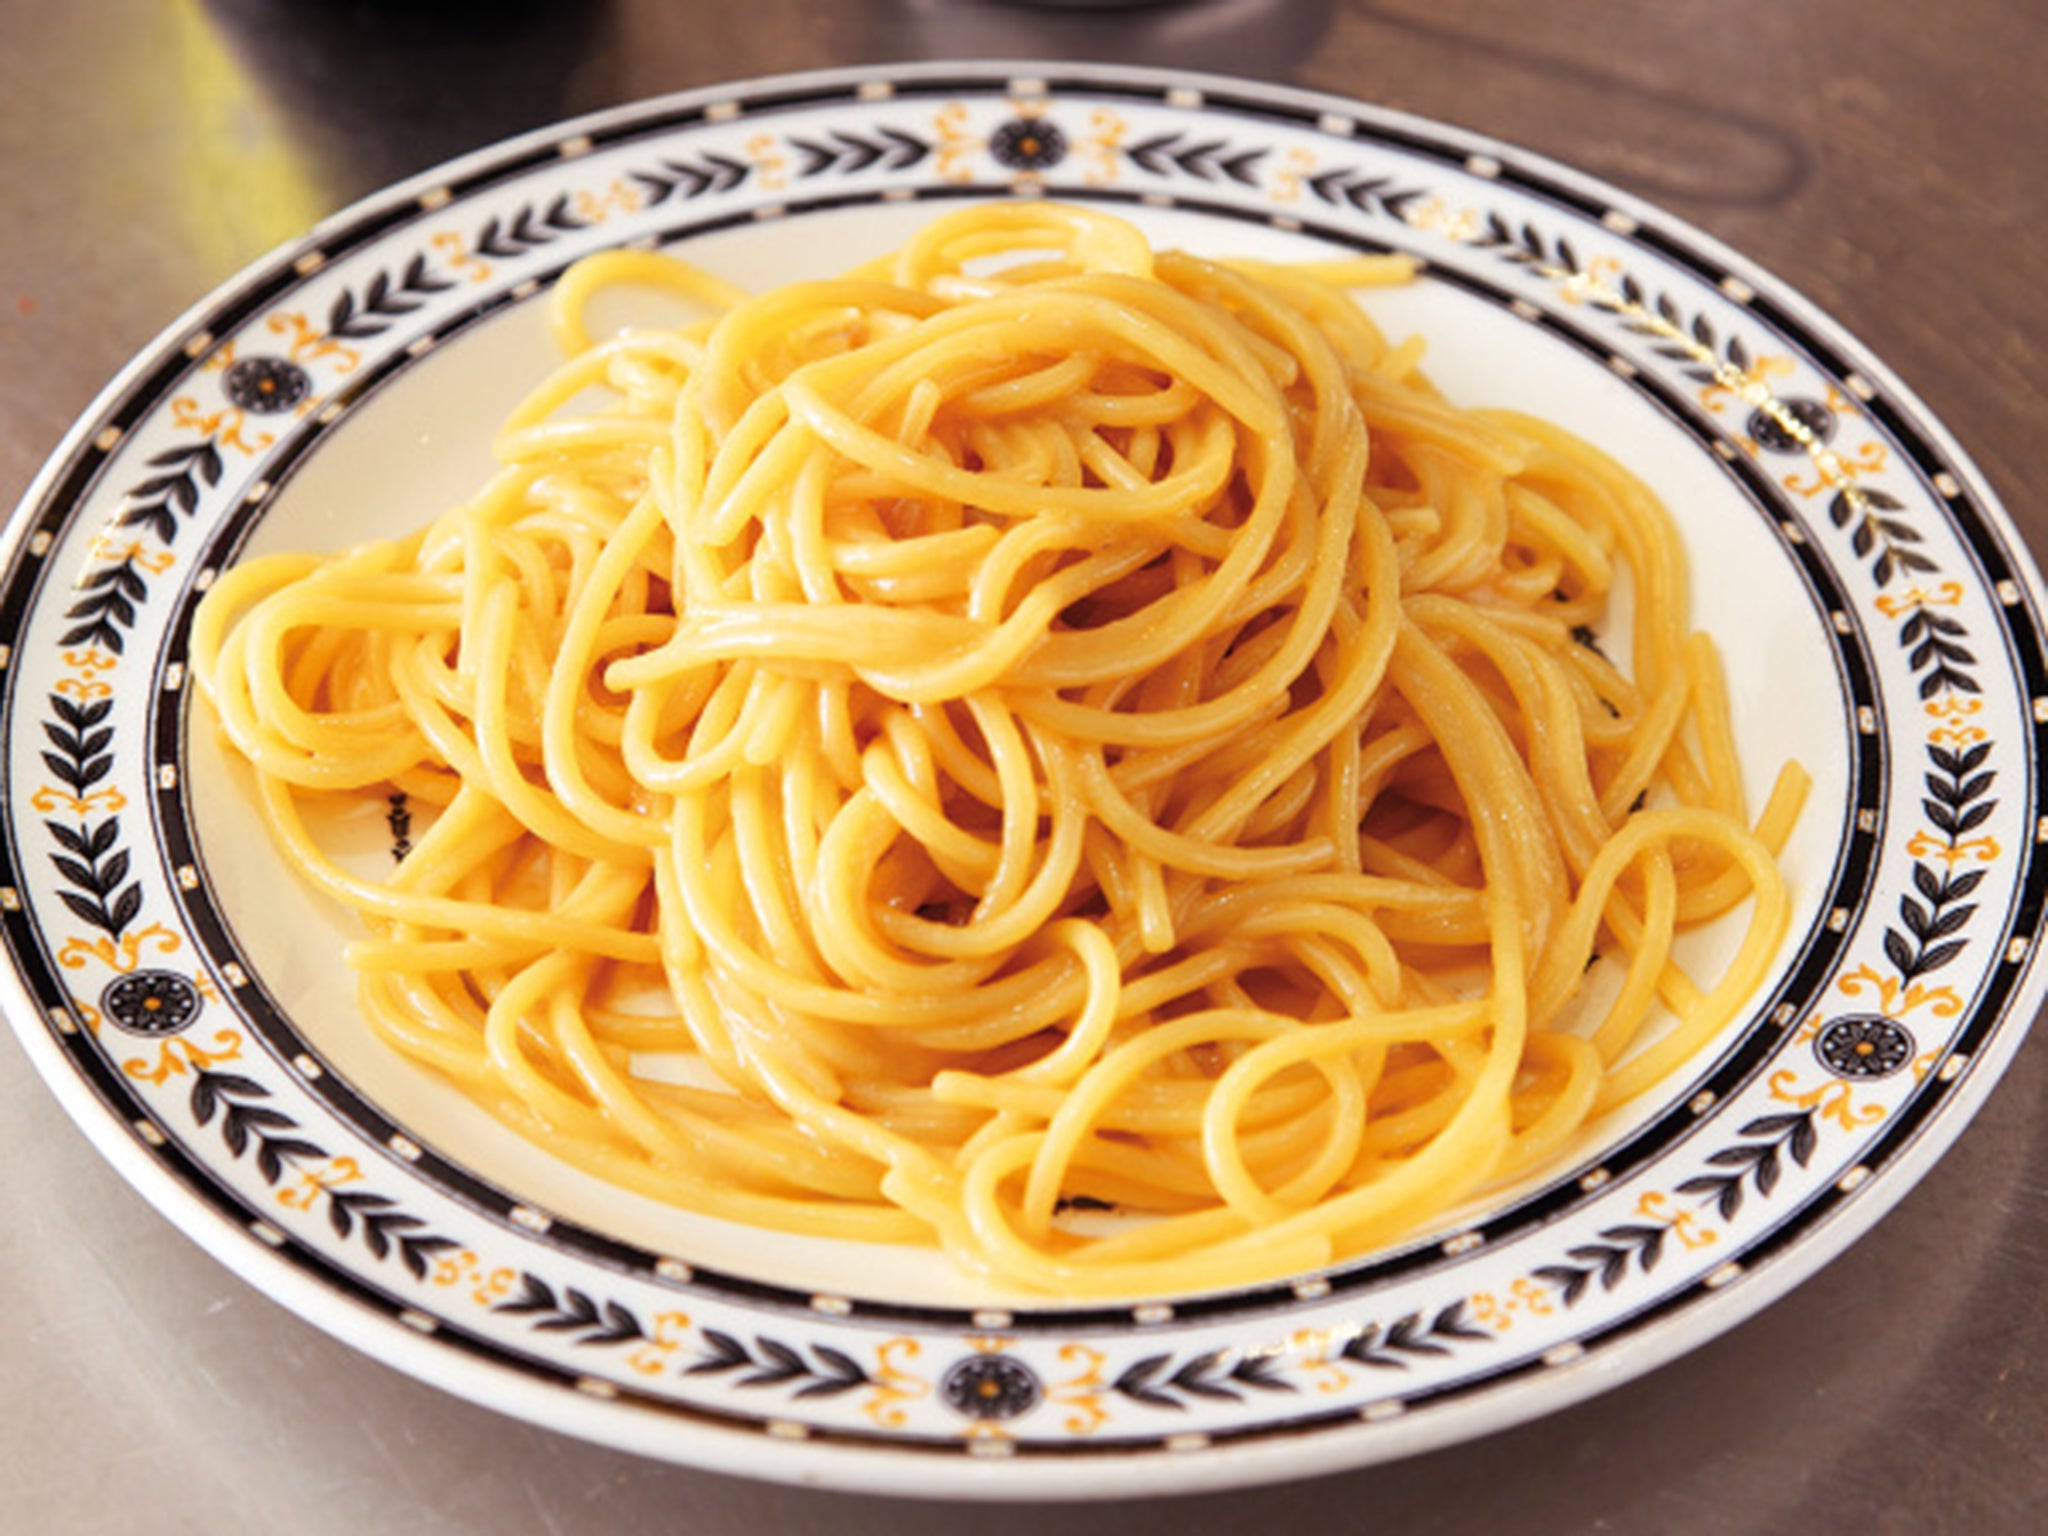 You might hate Marmite but you’ll likely love Lawson’s Marmite spaghetti